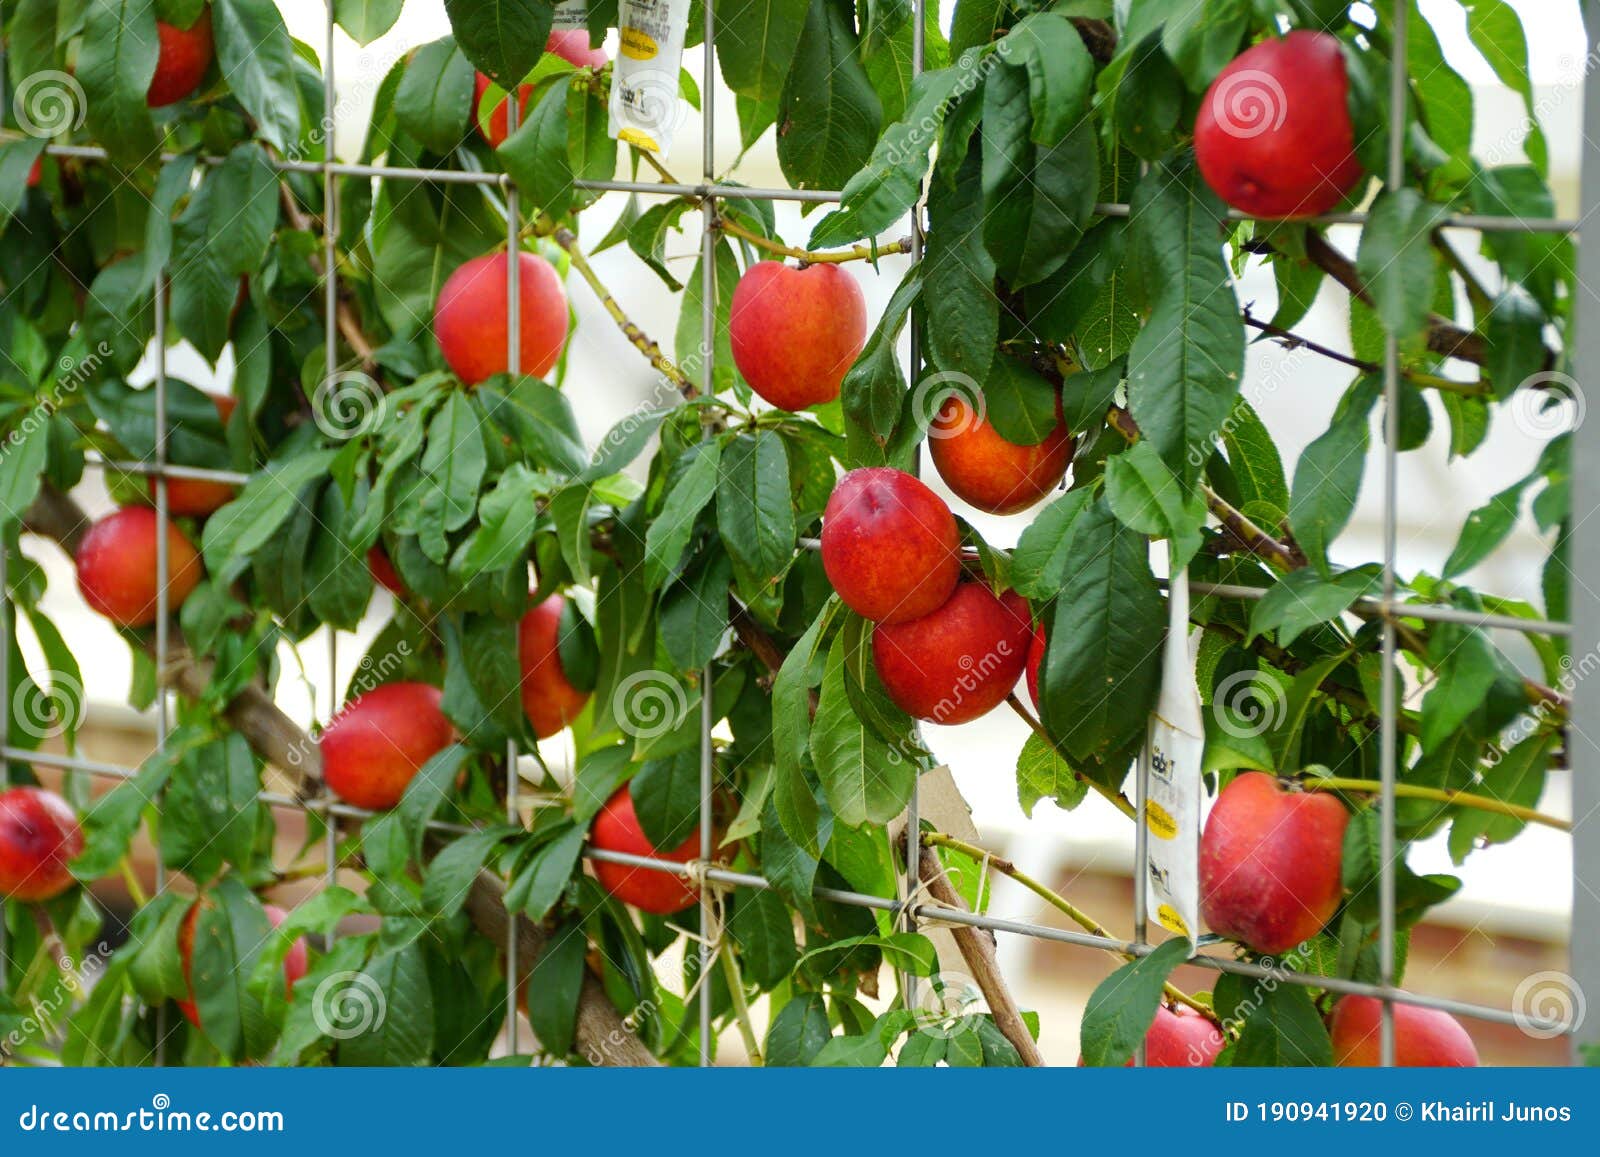 a bunch of red nectarine `fantasia` fruits